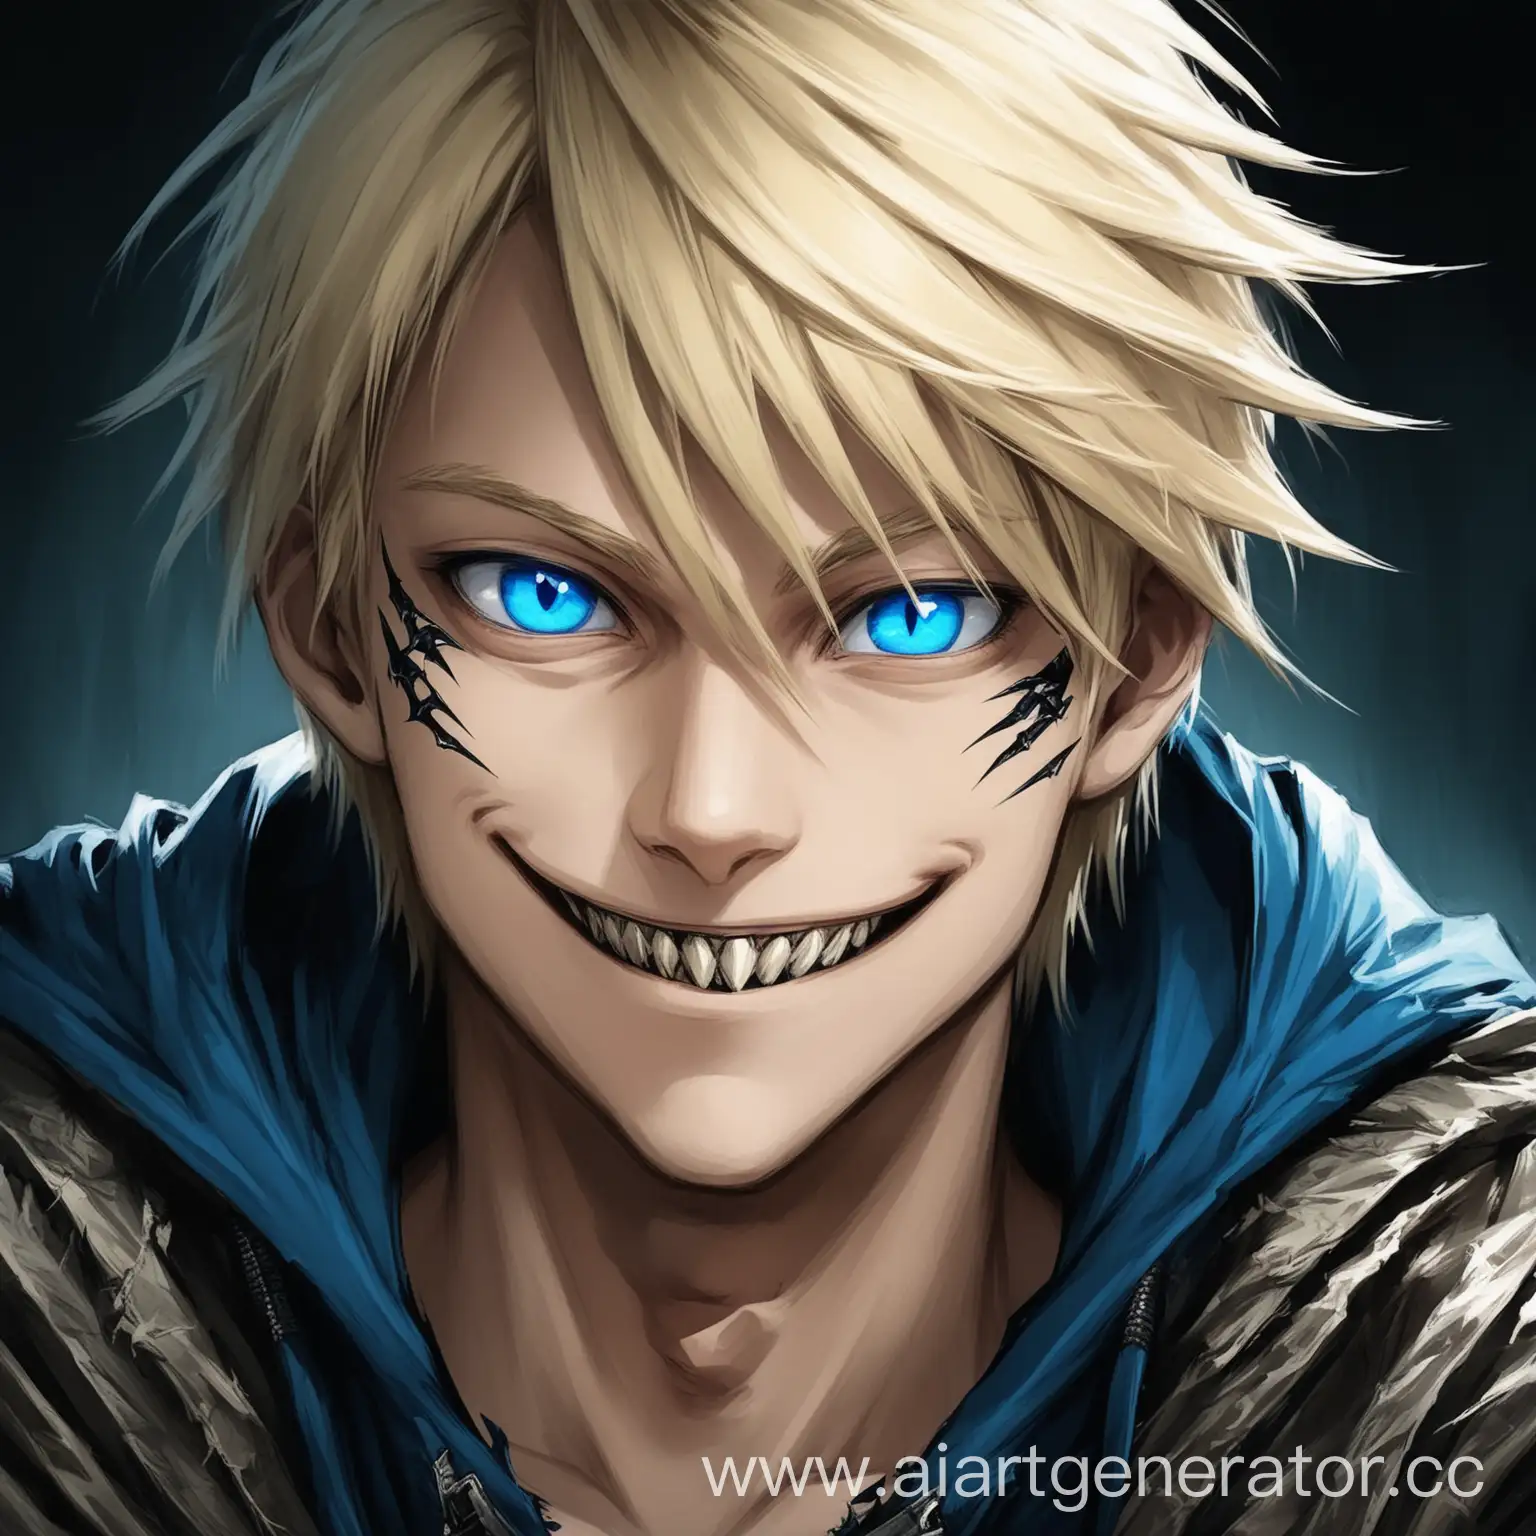 Charming-BlueEyed-Blond-Boy-with-a-Mischievous-Grin